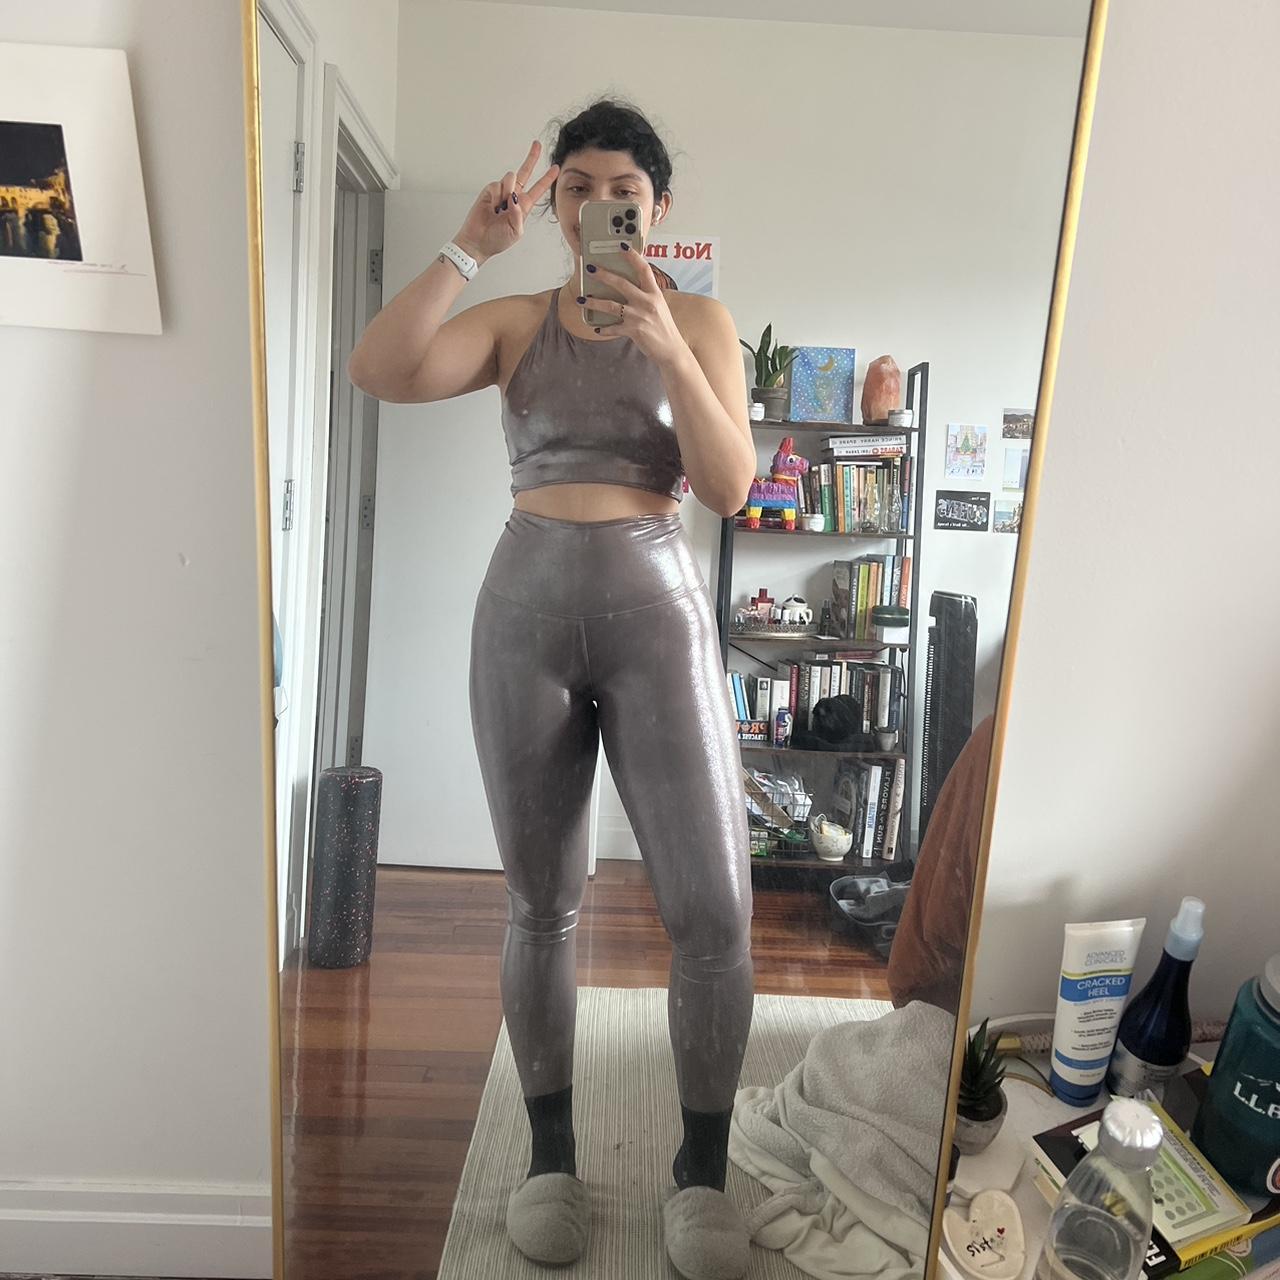 Small silver shiny leggings and bra workout set - Depop